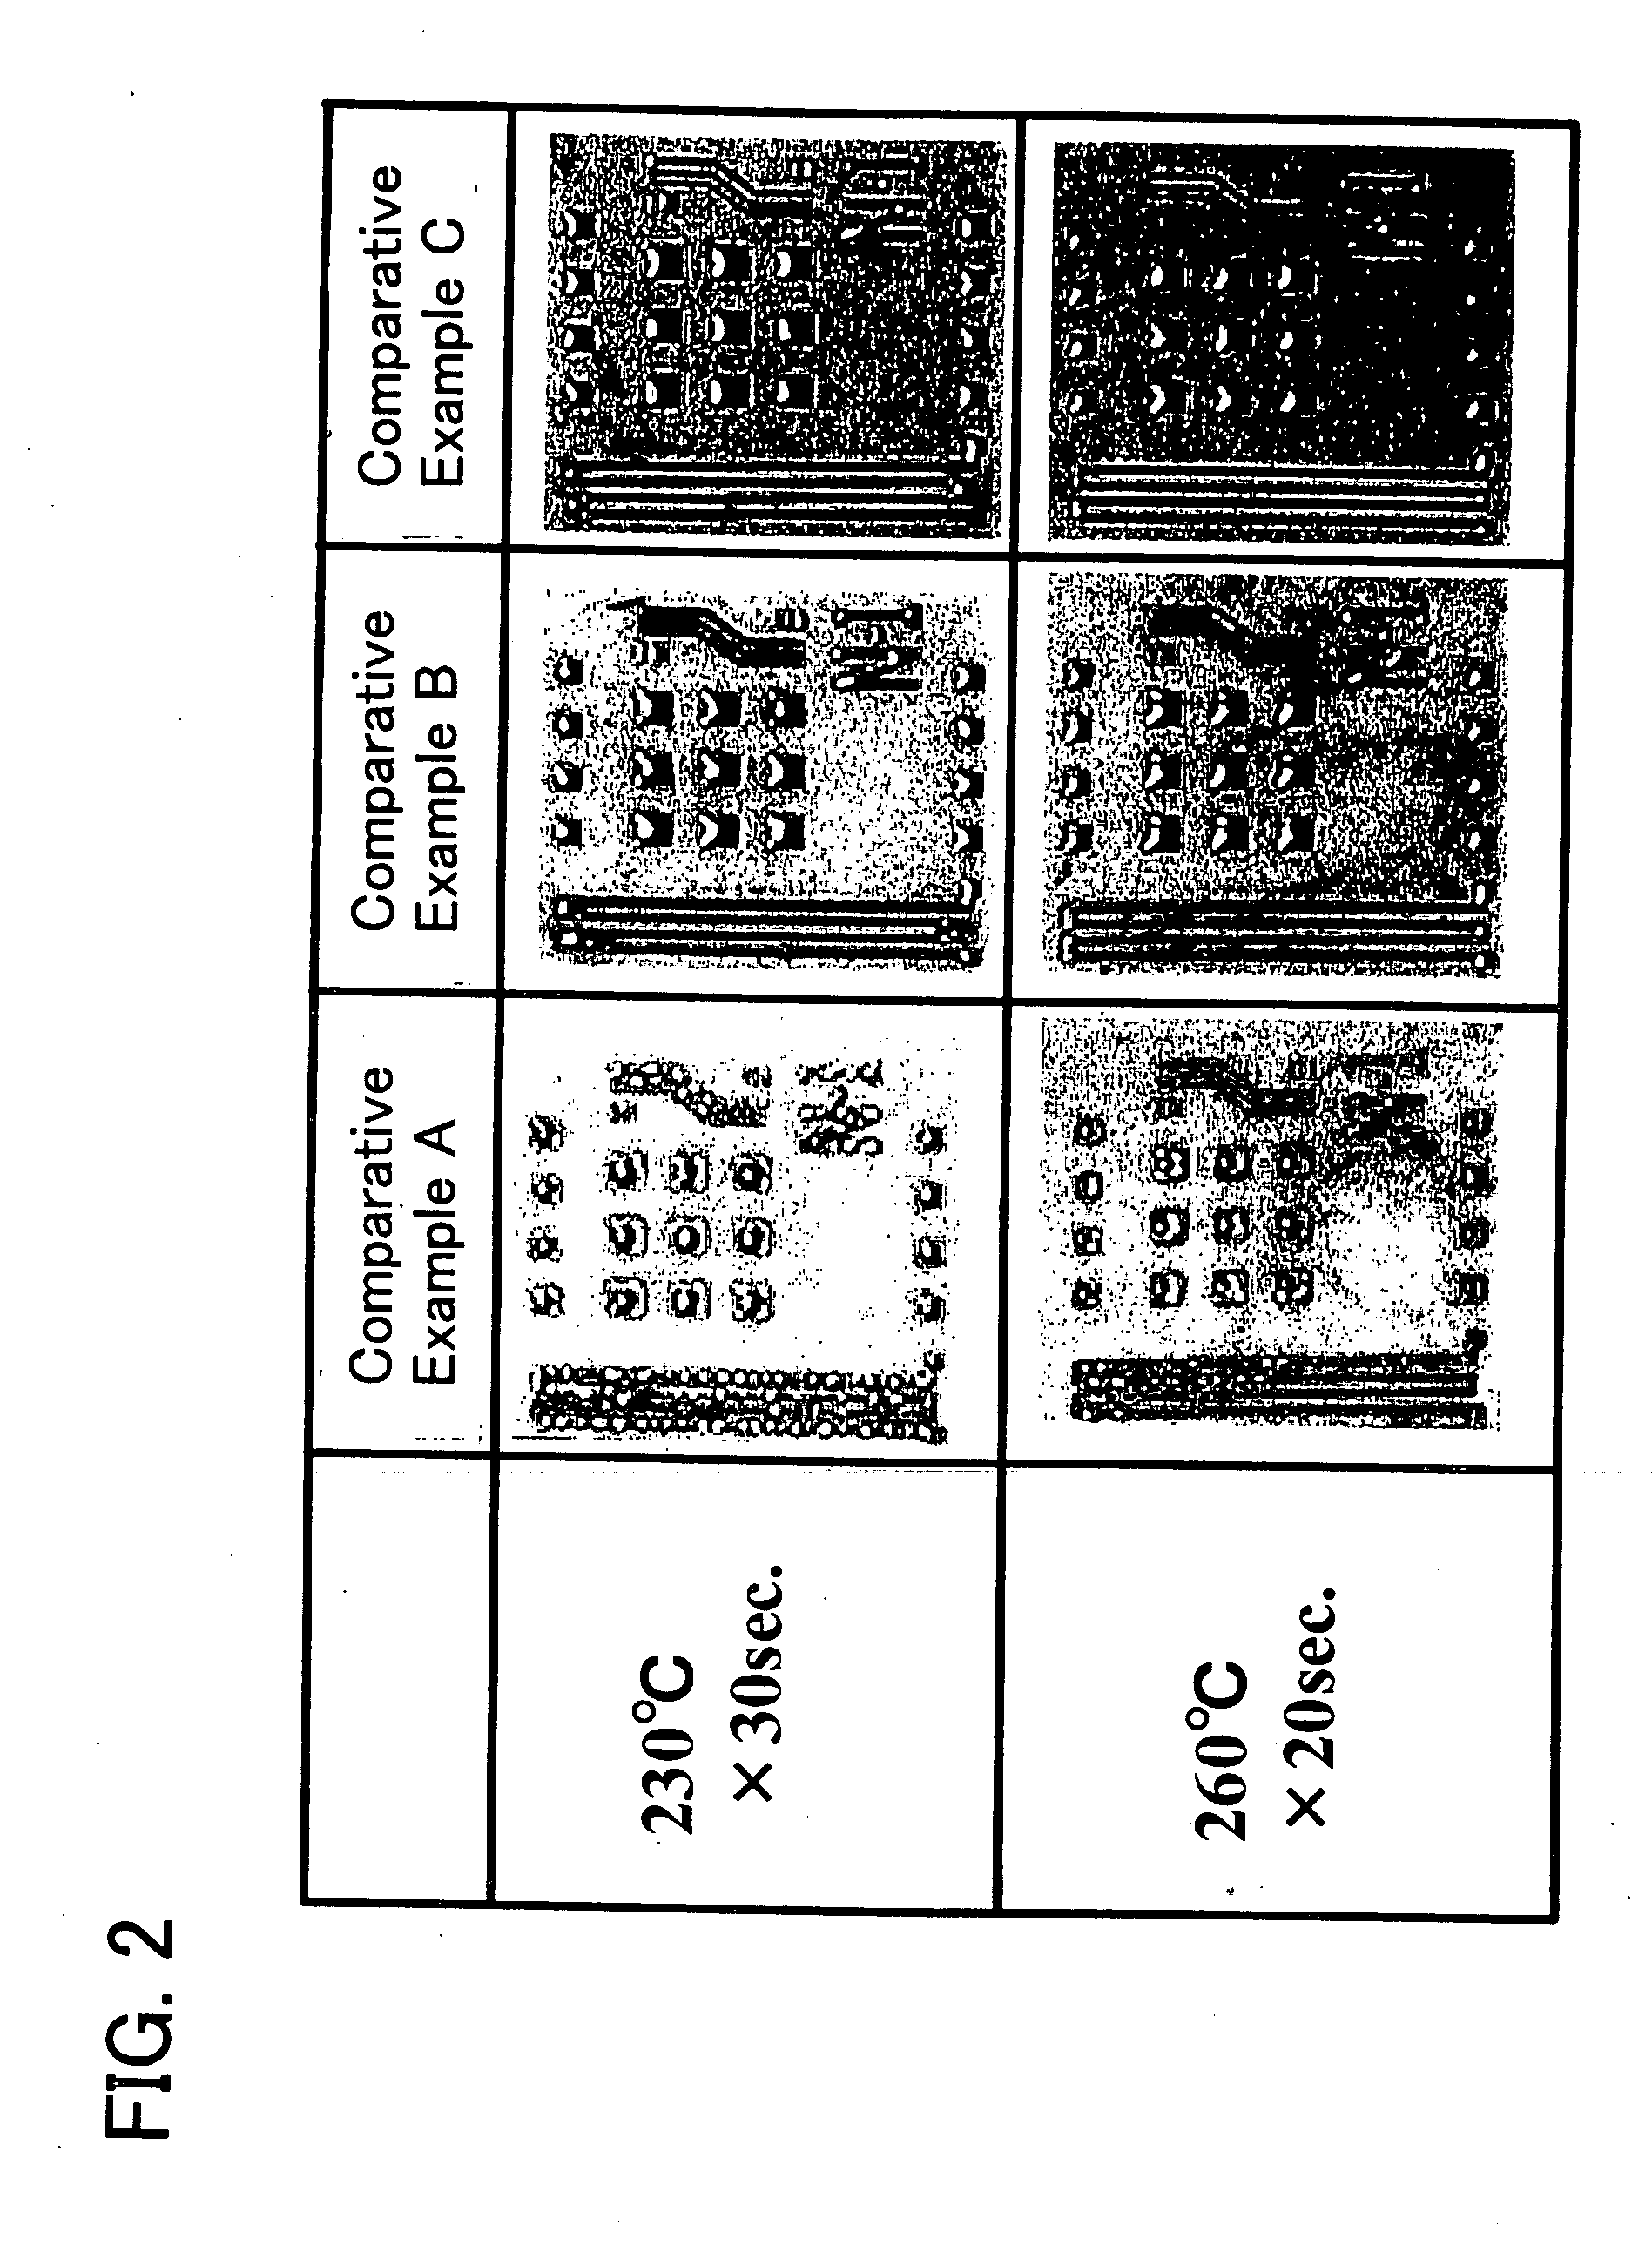 Conductor composition and method for production thereof